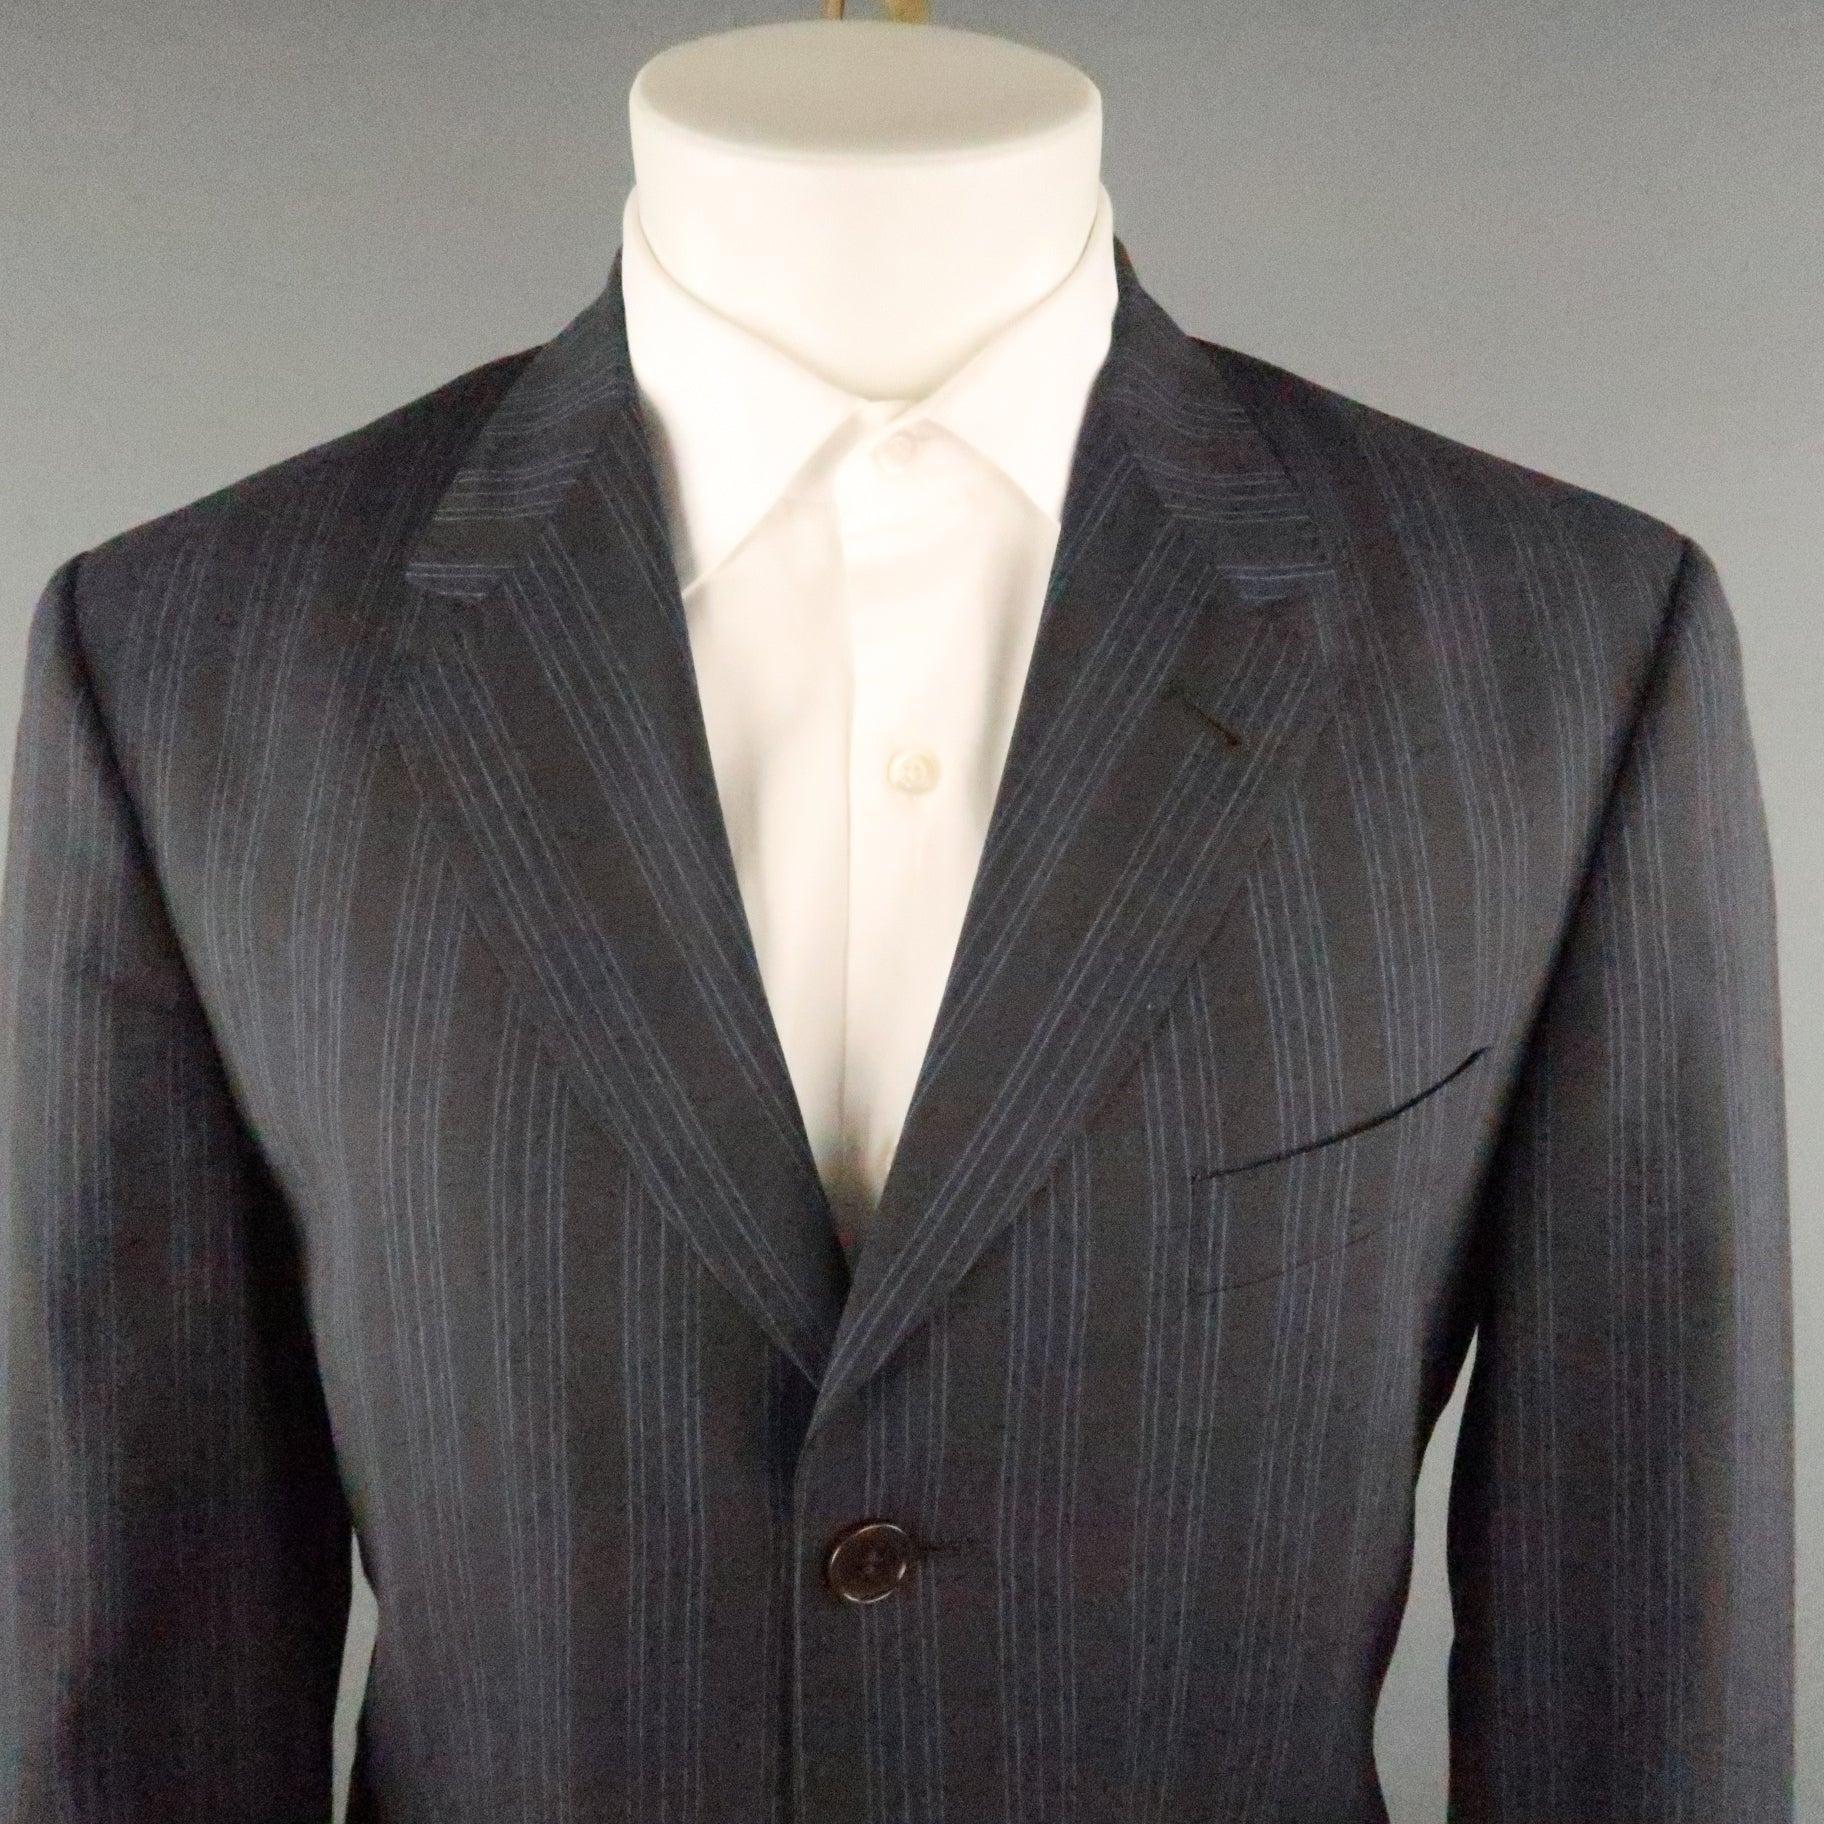 PAUL SMITH Chest Size 40 Gray & Blue Stripe Viscose Notch Lapel 34 30 Suit In Excellent Condition For Sale In San Francisco, CA